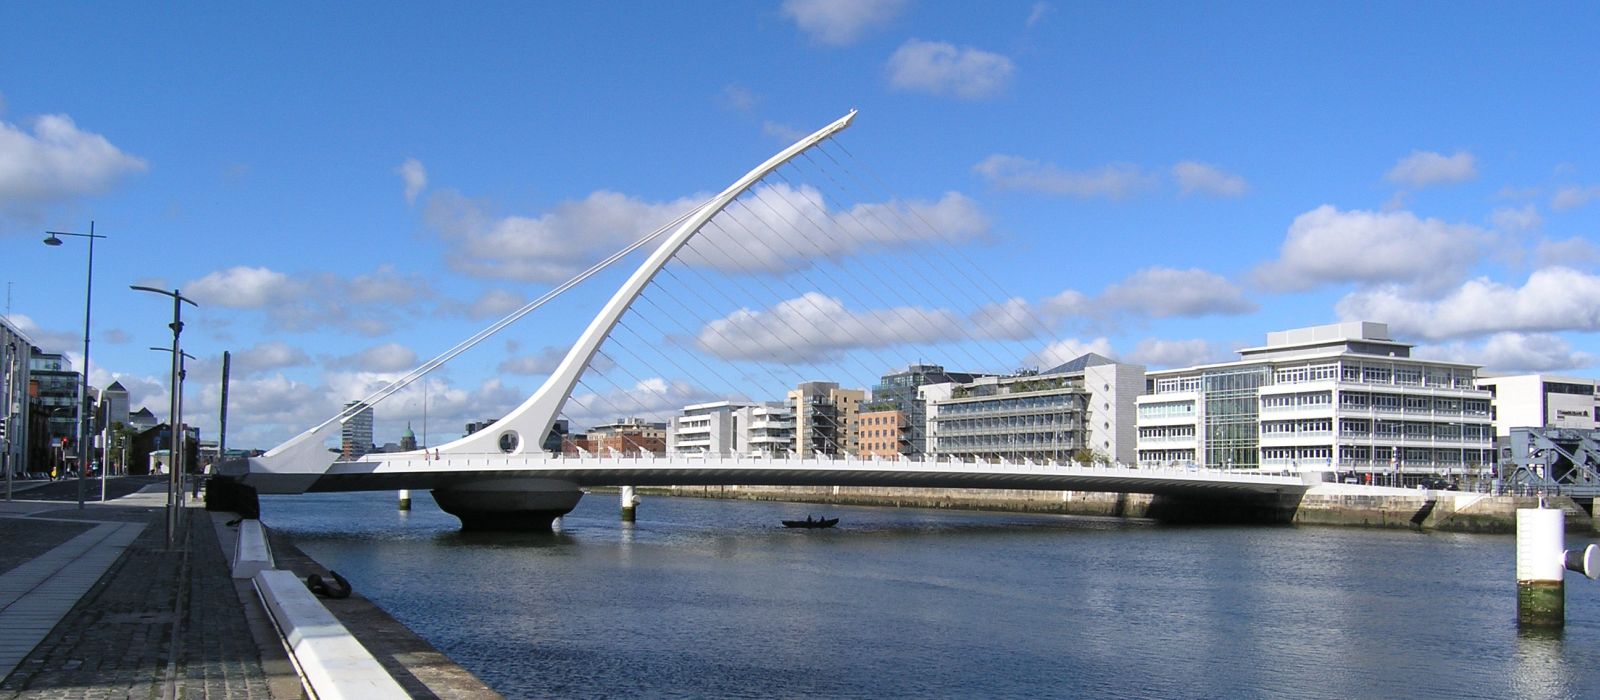 Make your own tour of Leinster with Discover Ireland Tours Destination Management Company